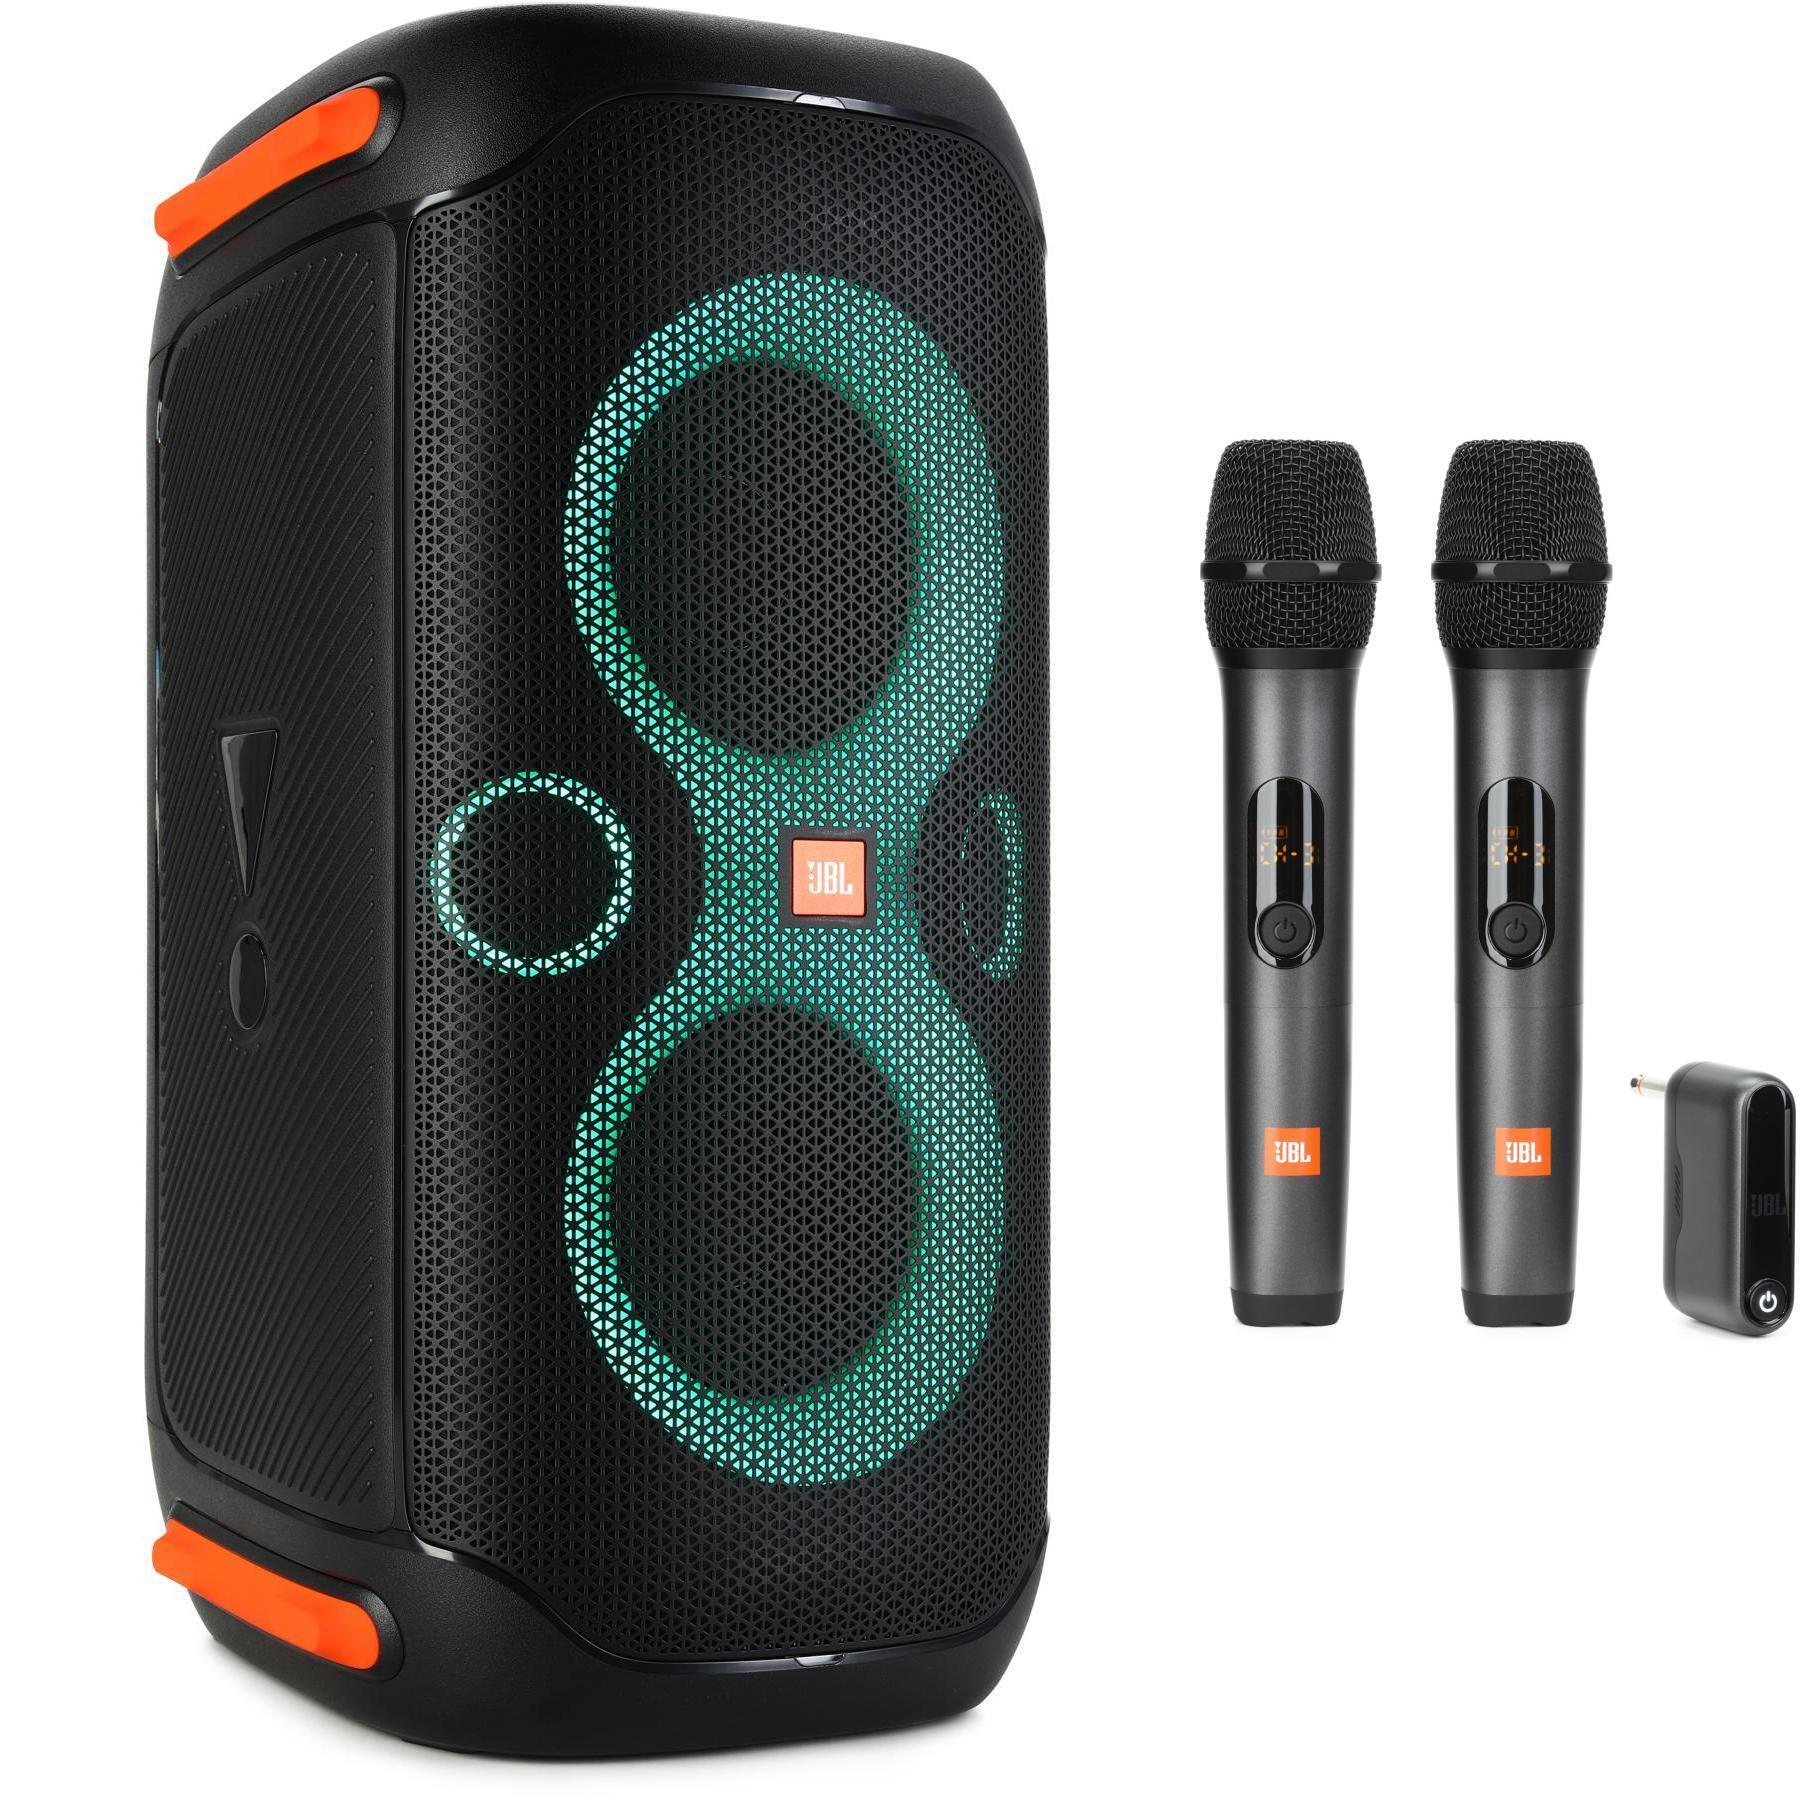 Start a party with the JBL Partybox 1000 - JBL (news)